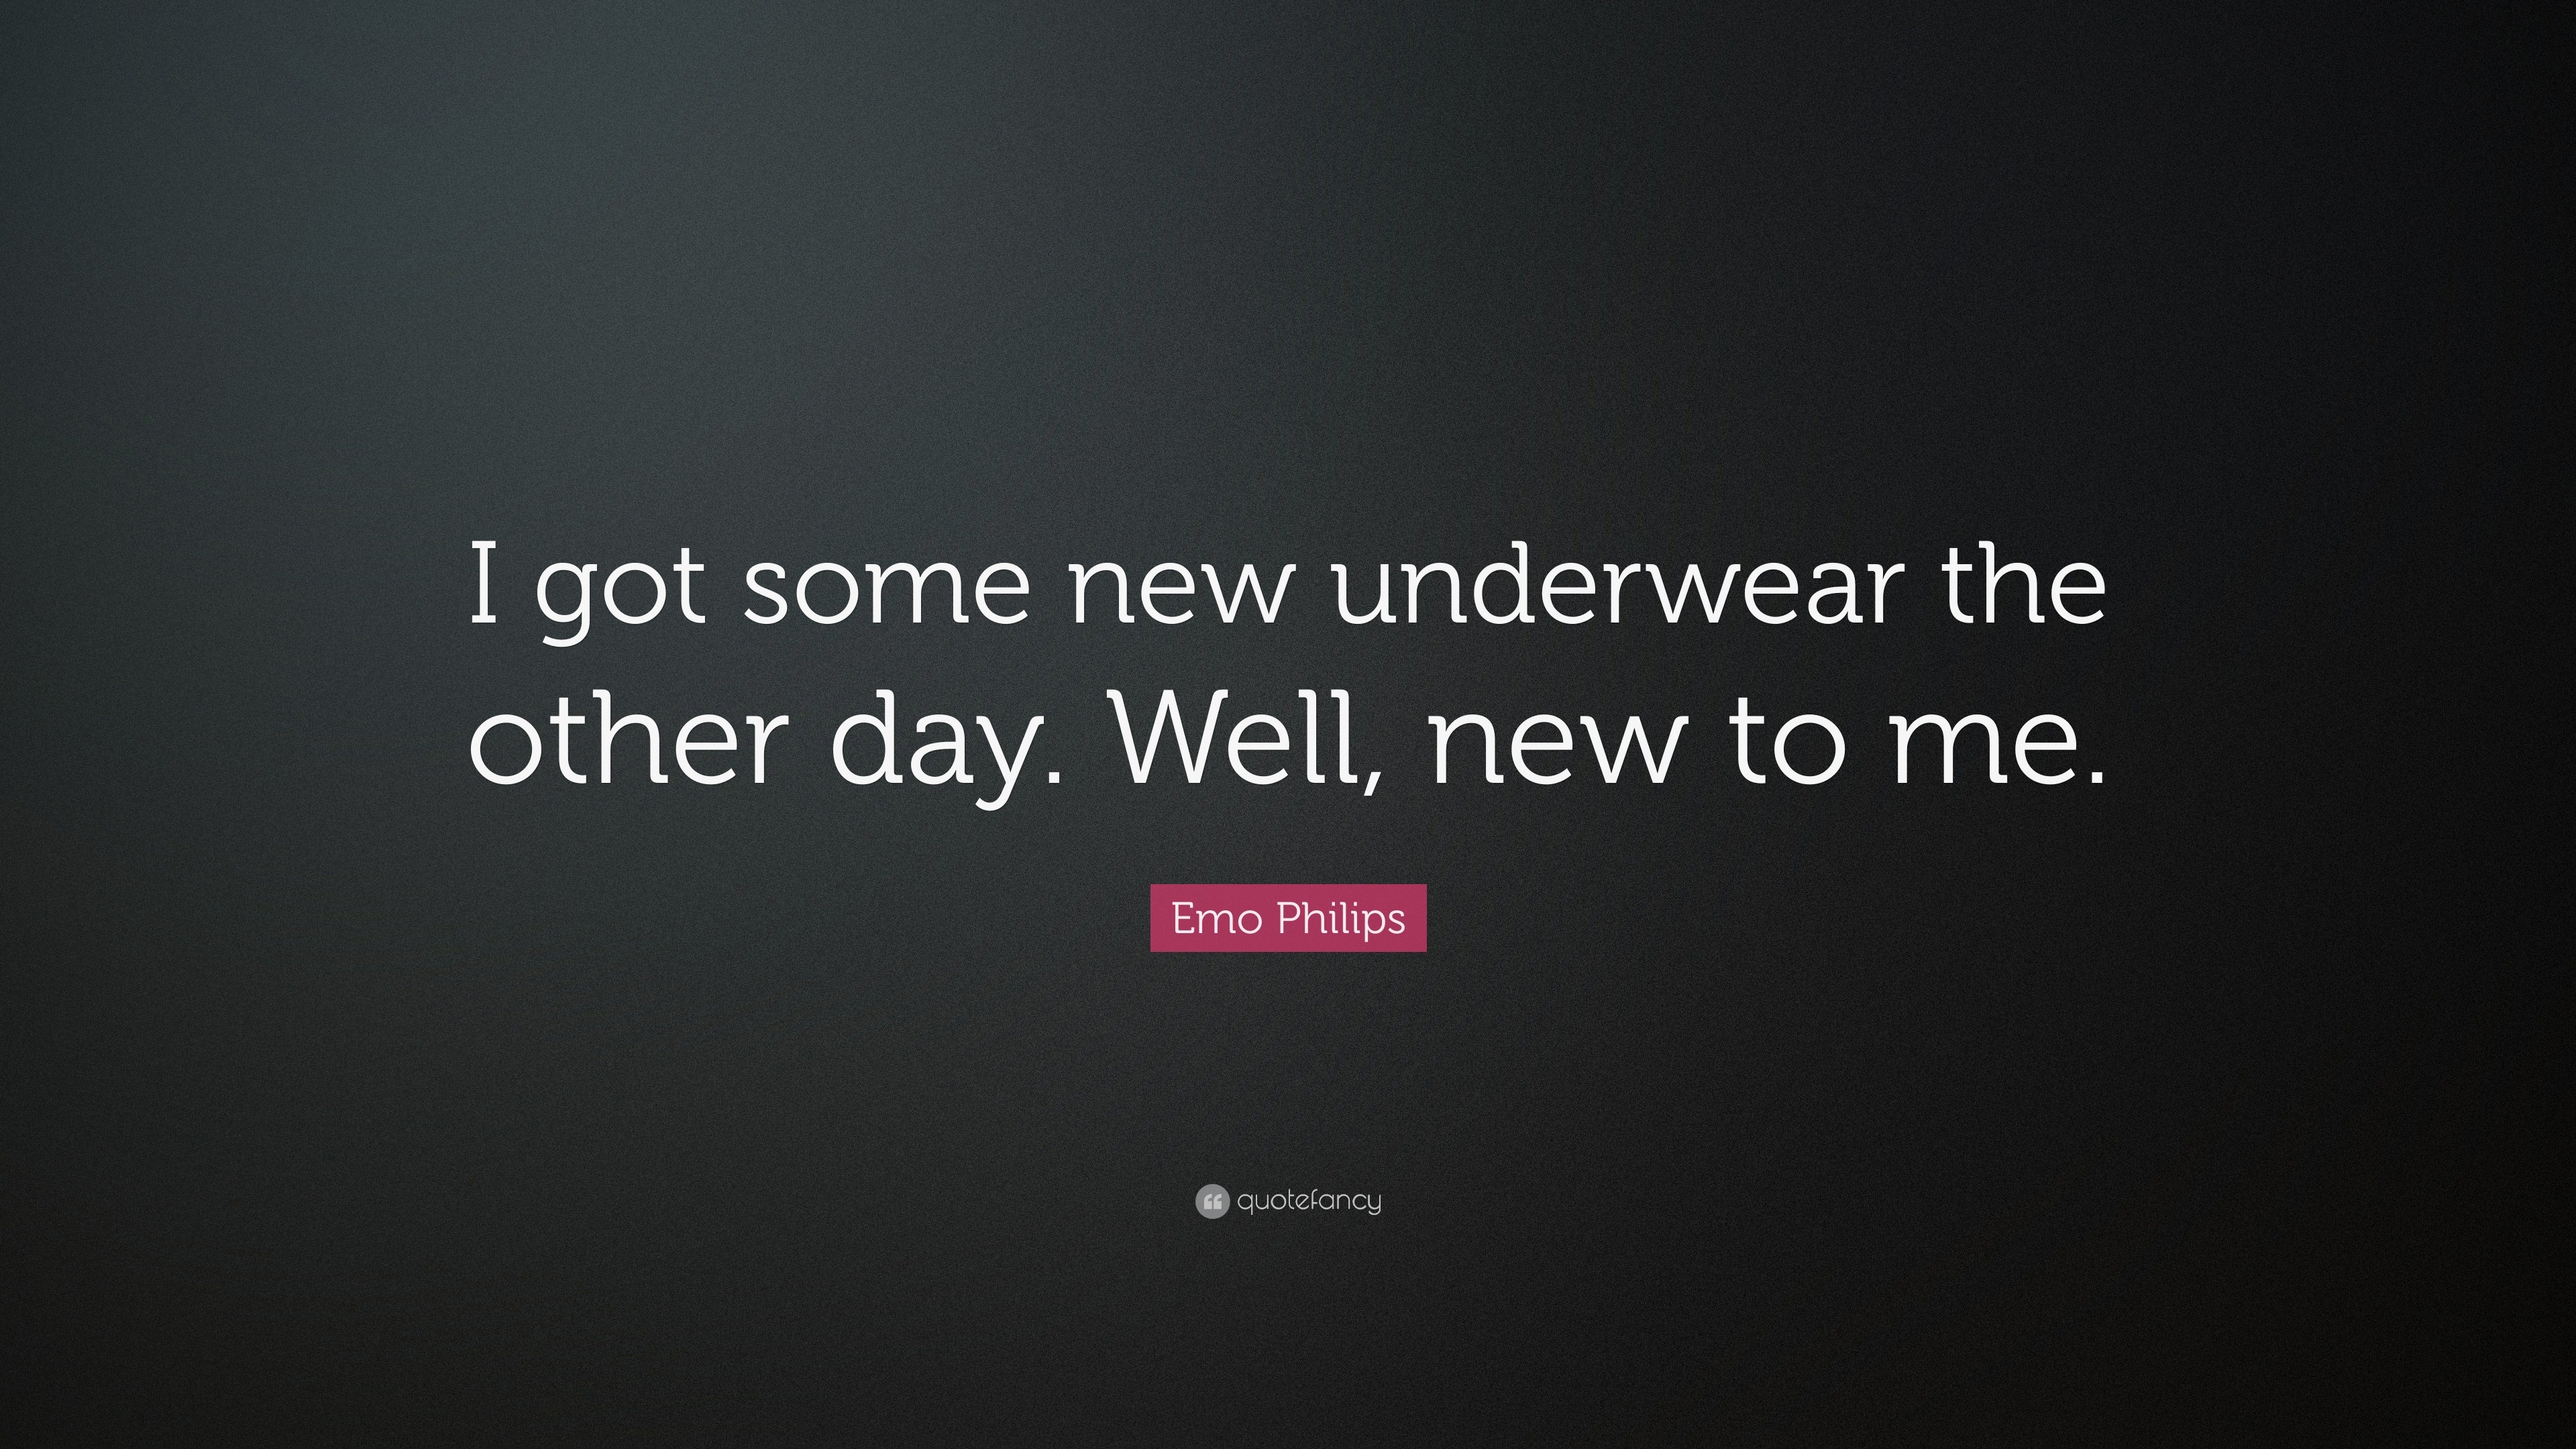 Emo Philips - I got some new underwear the other day.